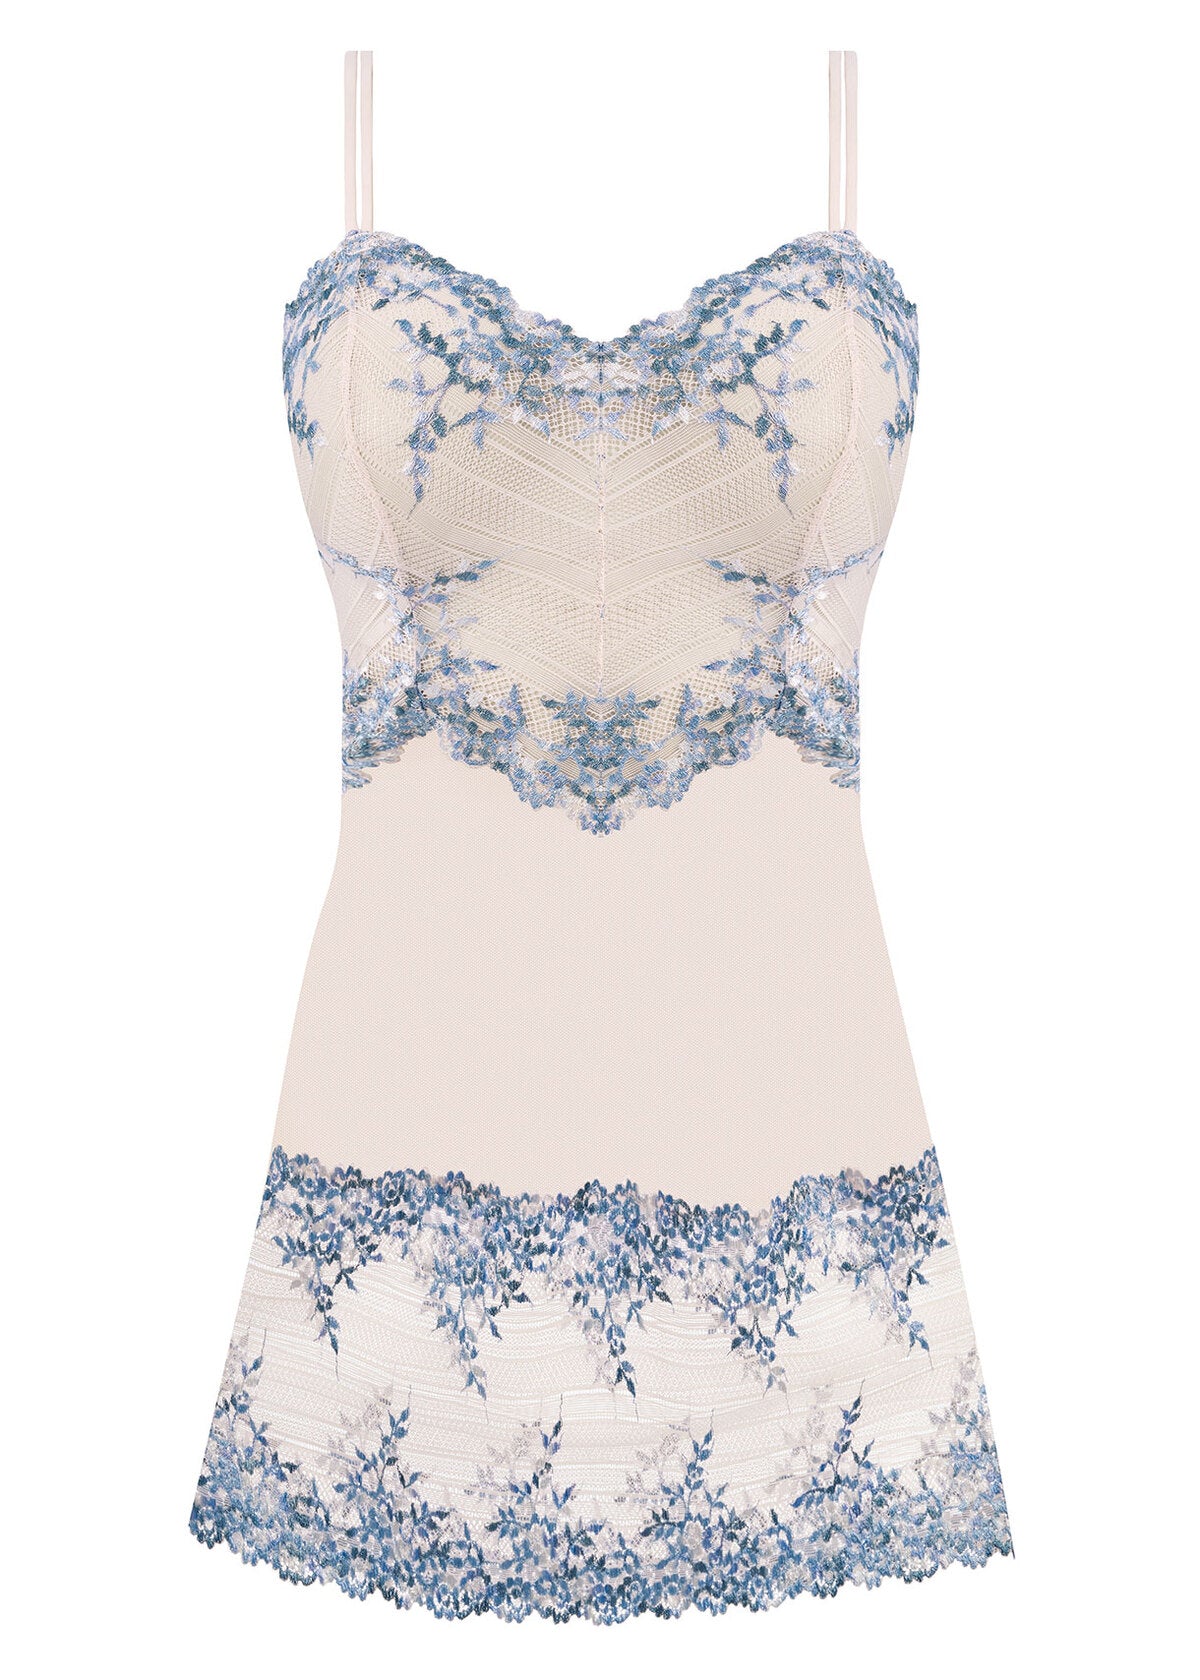 Embrace Lace Chemise In Parchment/Blue by Wacoal – My Bare Essentials